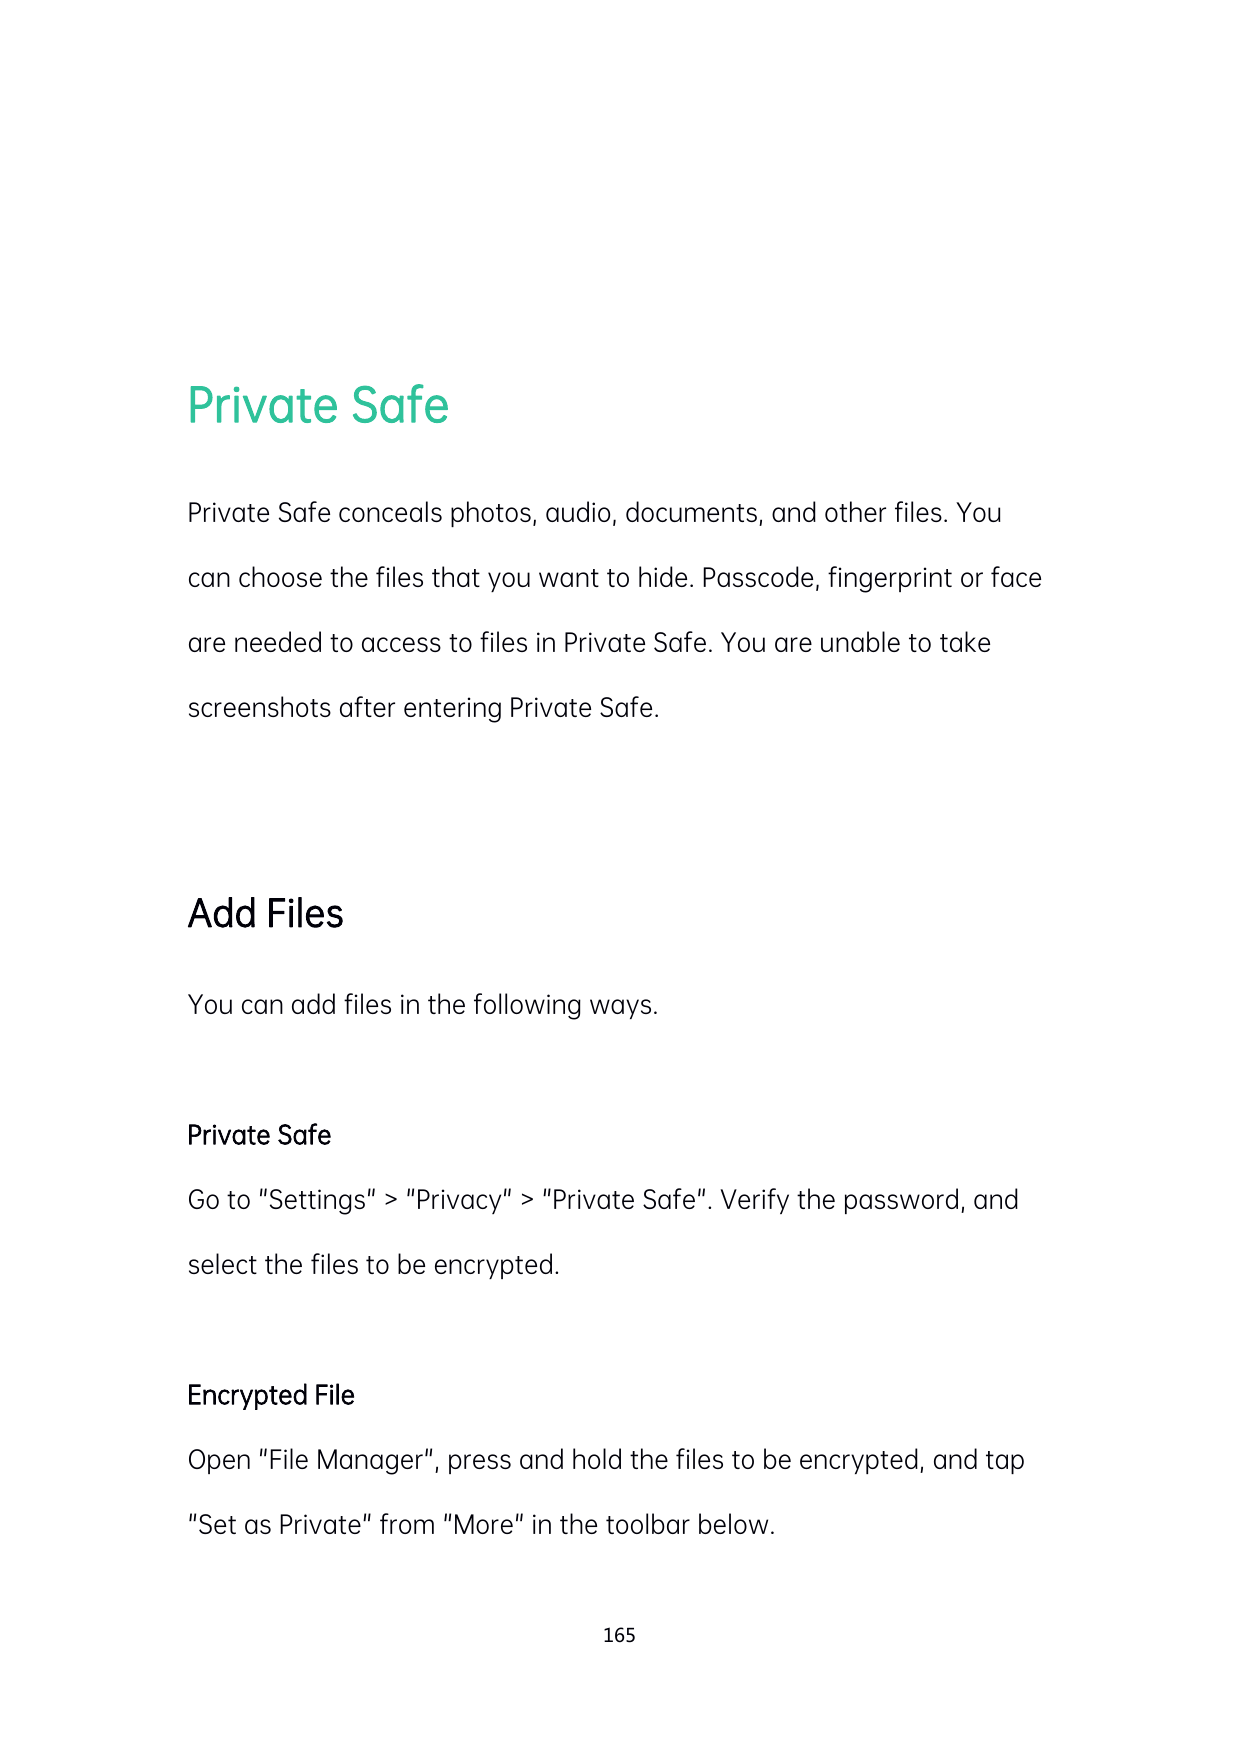 Private SafePrivate Safe conceals photos, audio, documents, and other files. Youcan choose the files that you want to hide. Pass